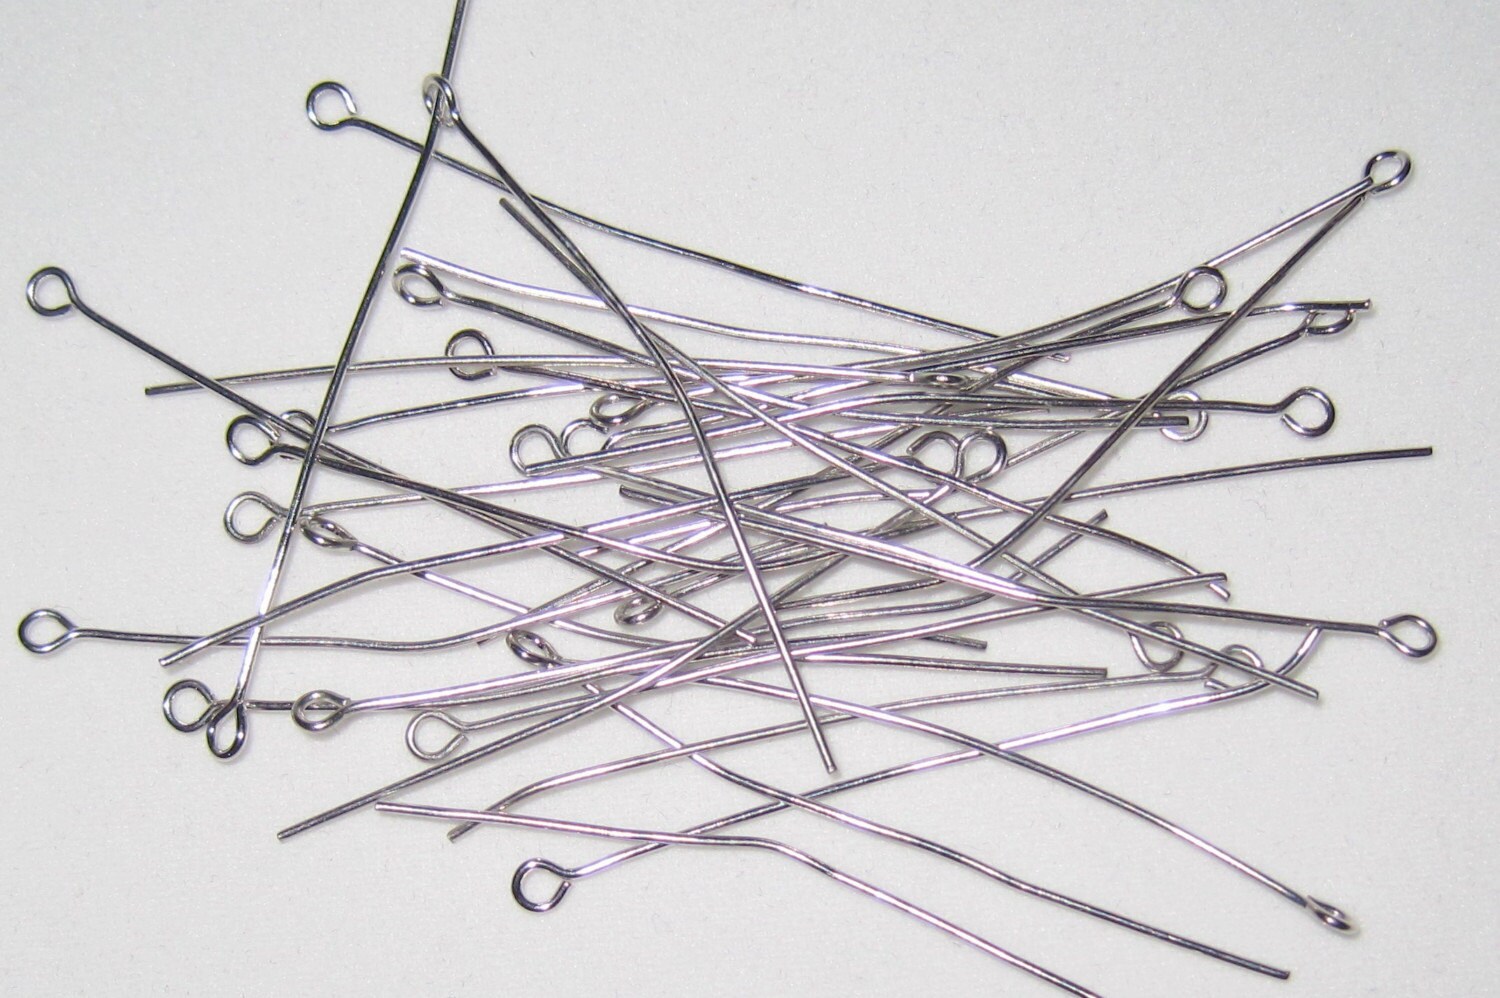 STAINLESS STEEL EYE PINS 34 PINS 51MM